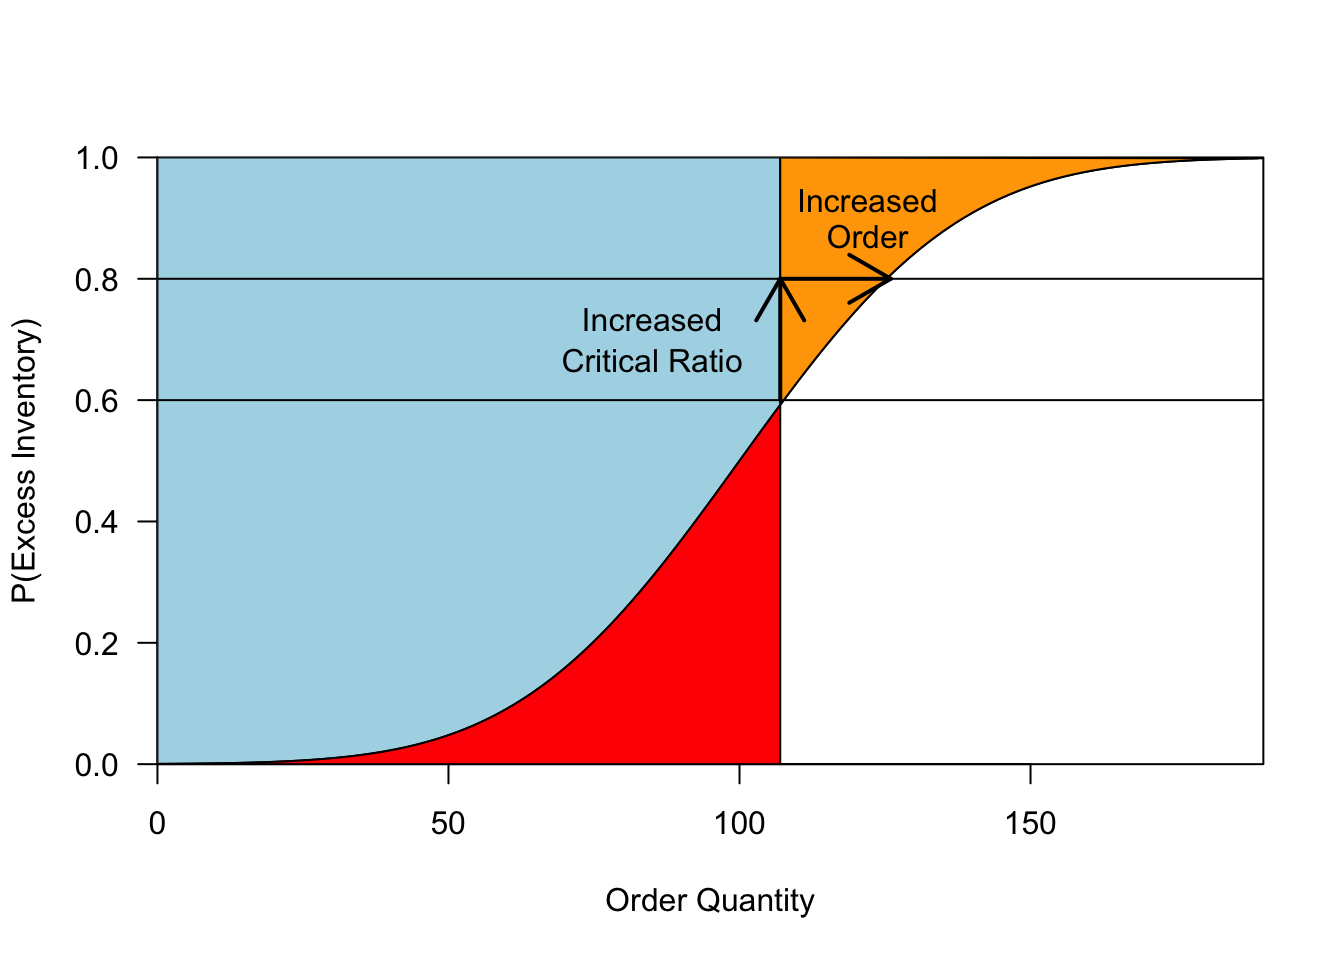 As the critical ratio increases, so does the optimal order quantity. The rate of increase is largest when demand is very uncertain.